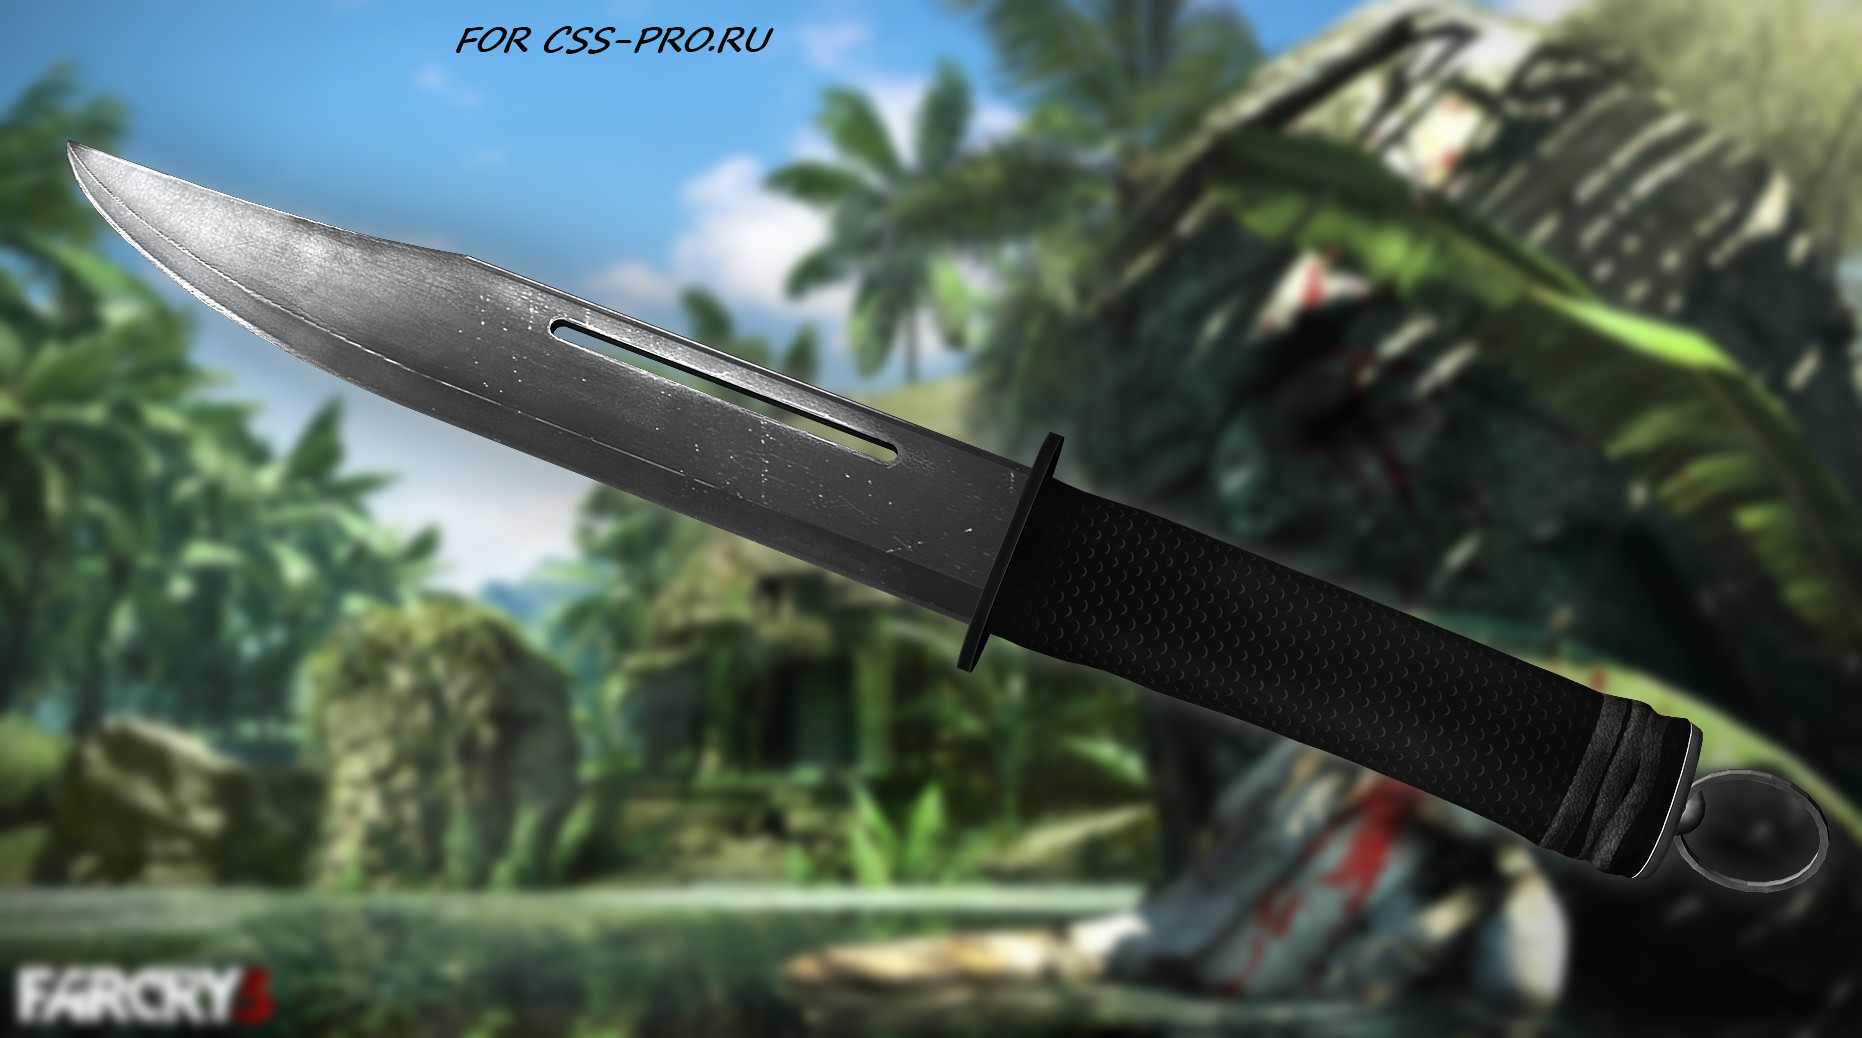 FarCry3 Style Knife Retextured